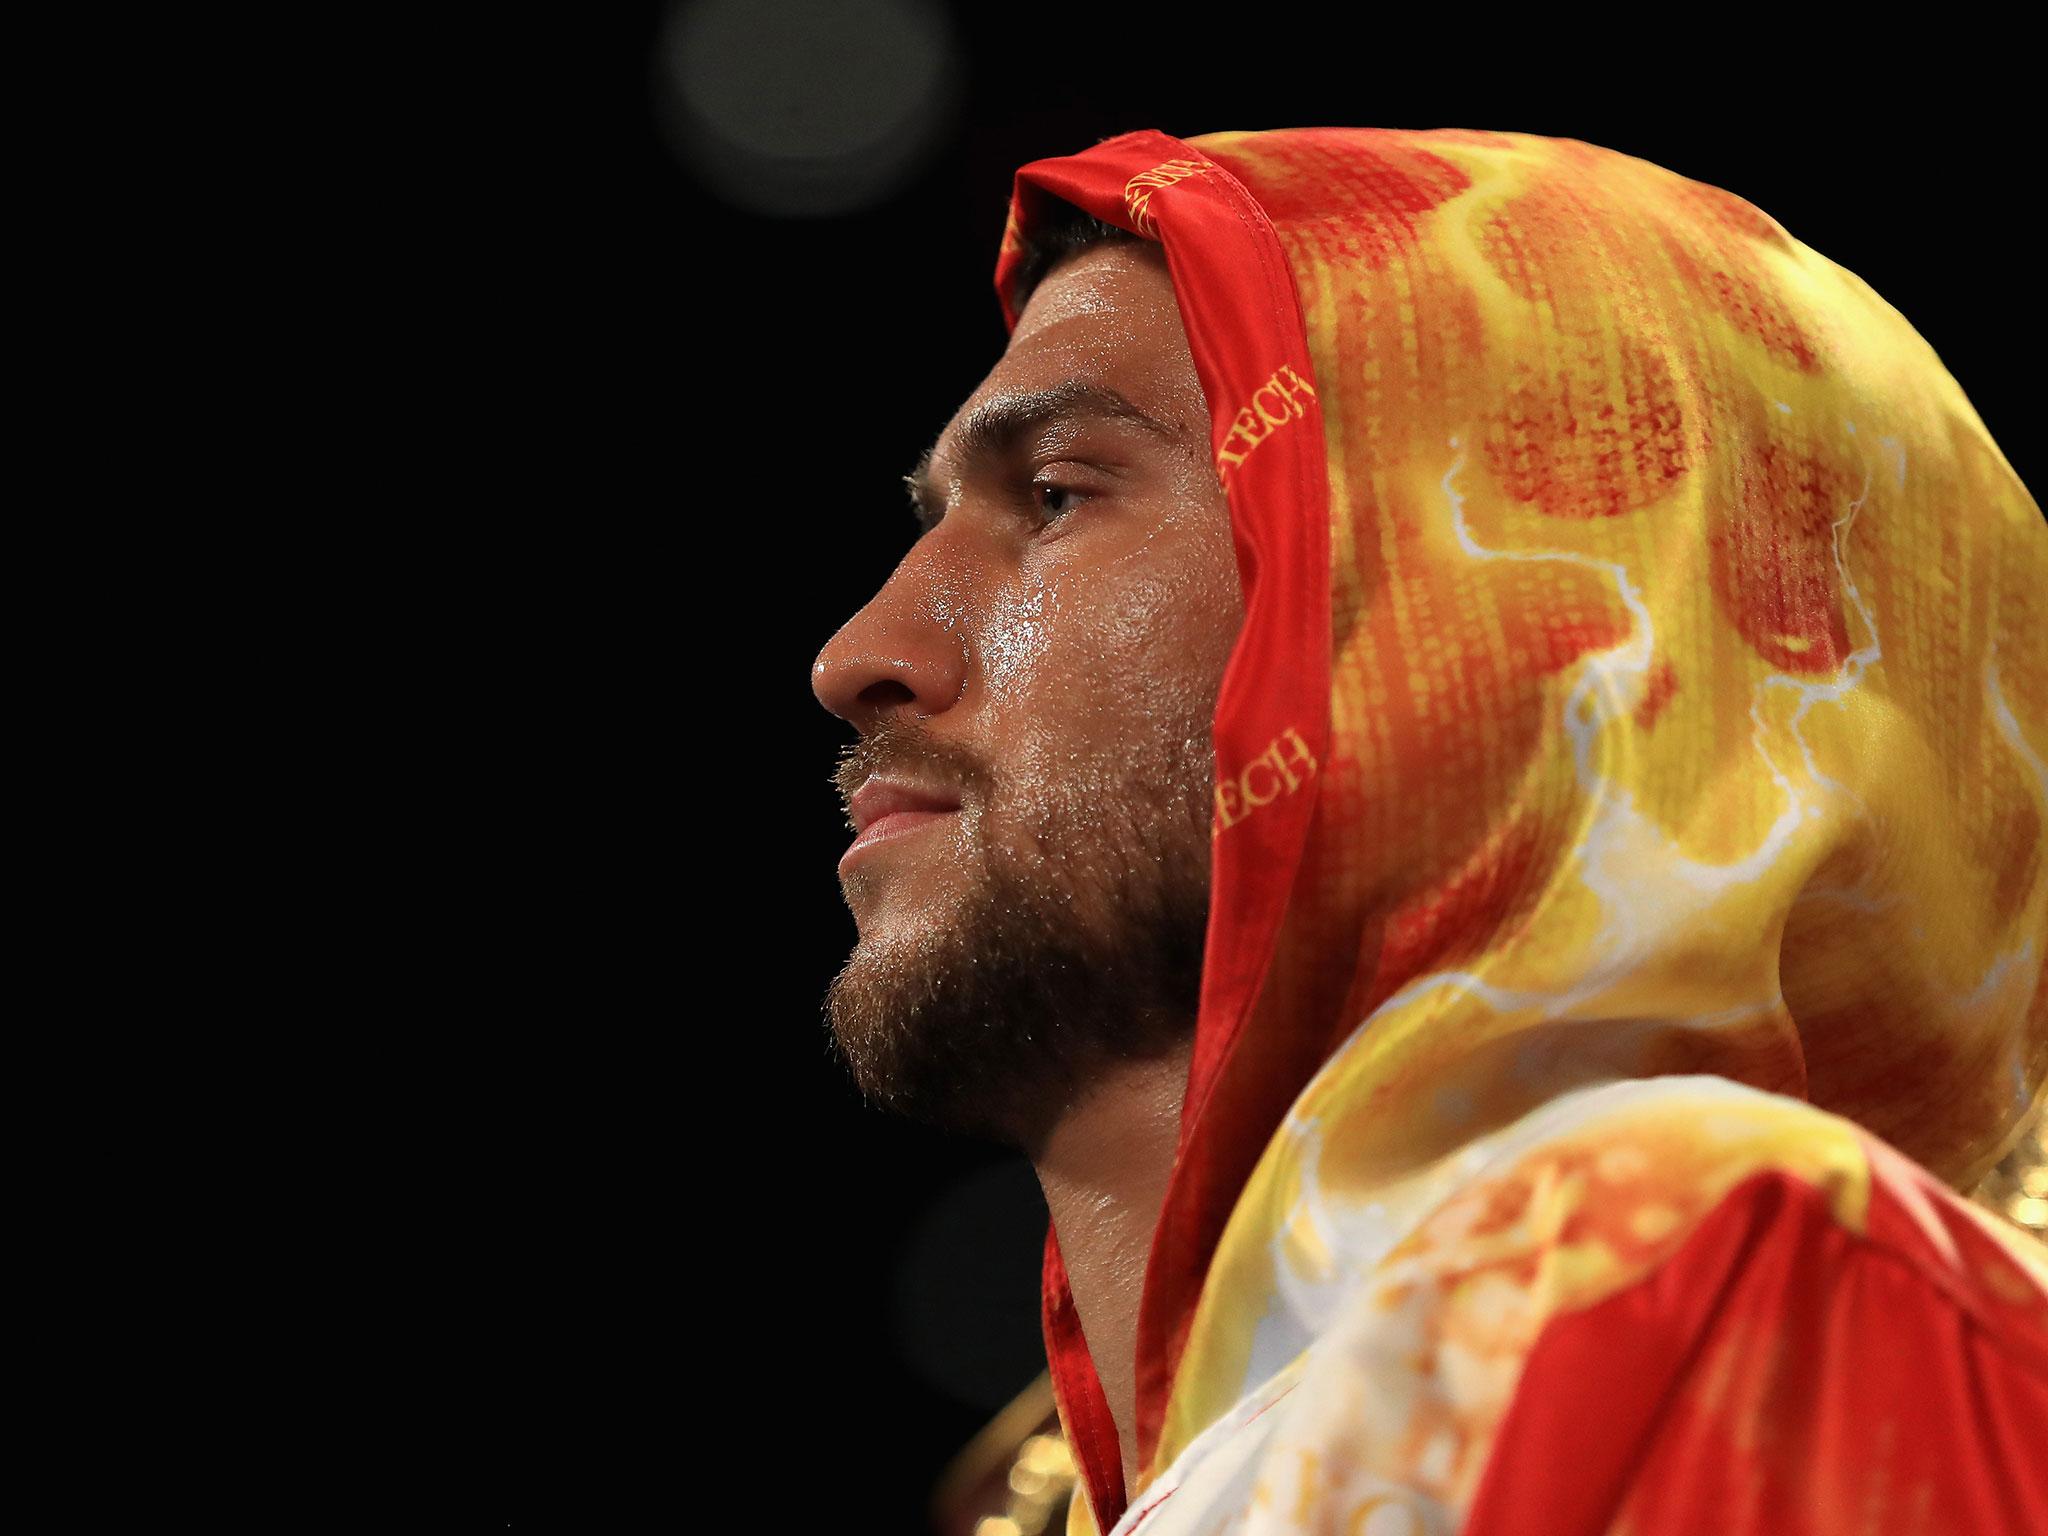 Lomachenko has been tipped to beat Rigondeaux in Saturday's fight